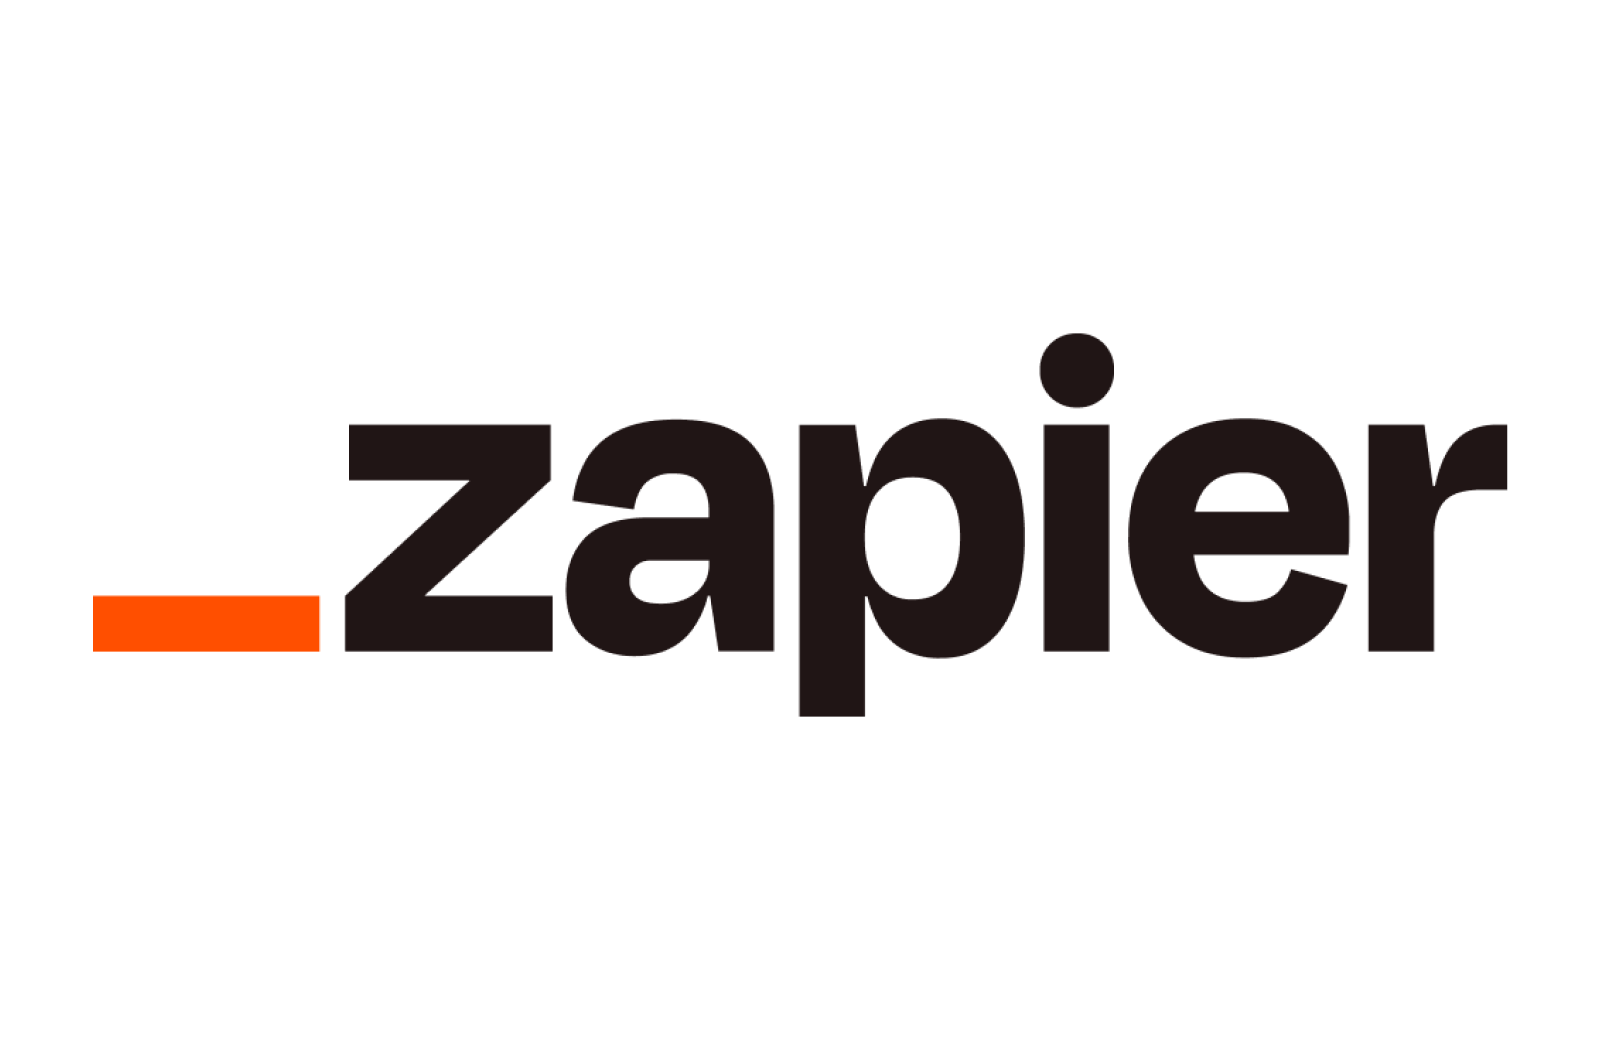 The SaaS platform Zapier has completely changed workflow automation for companies of all sizes. 